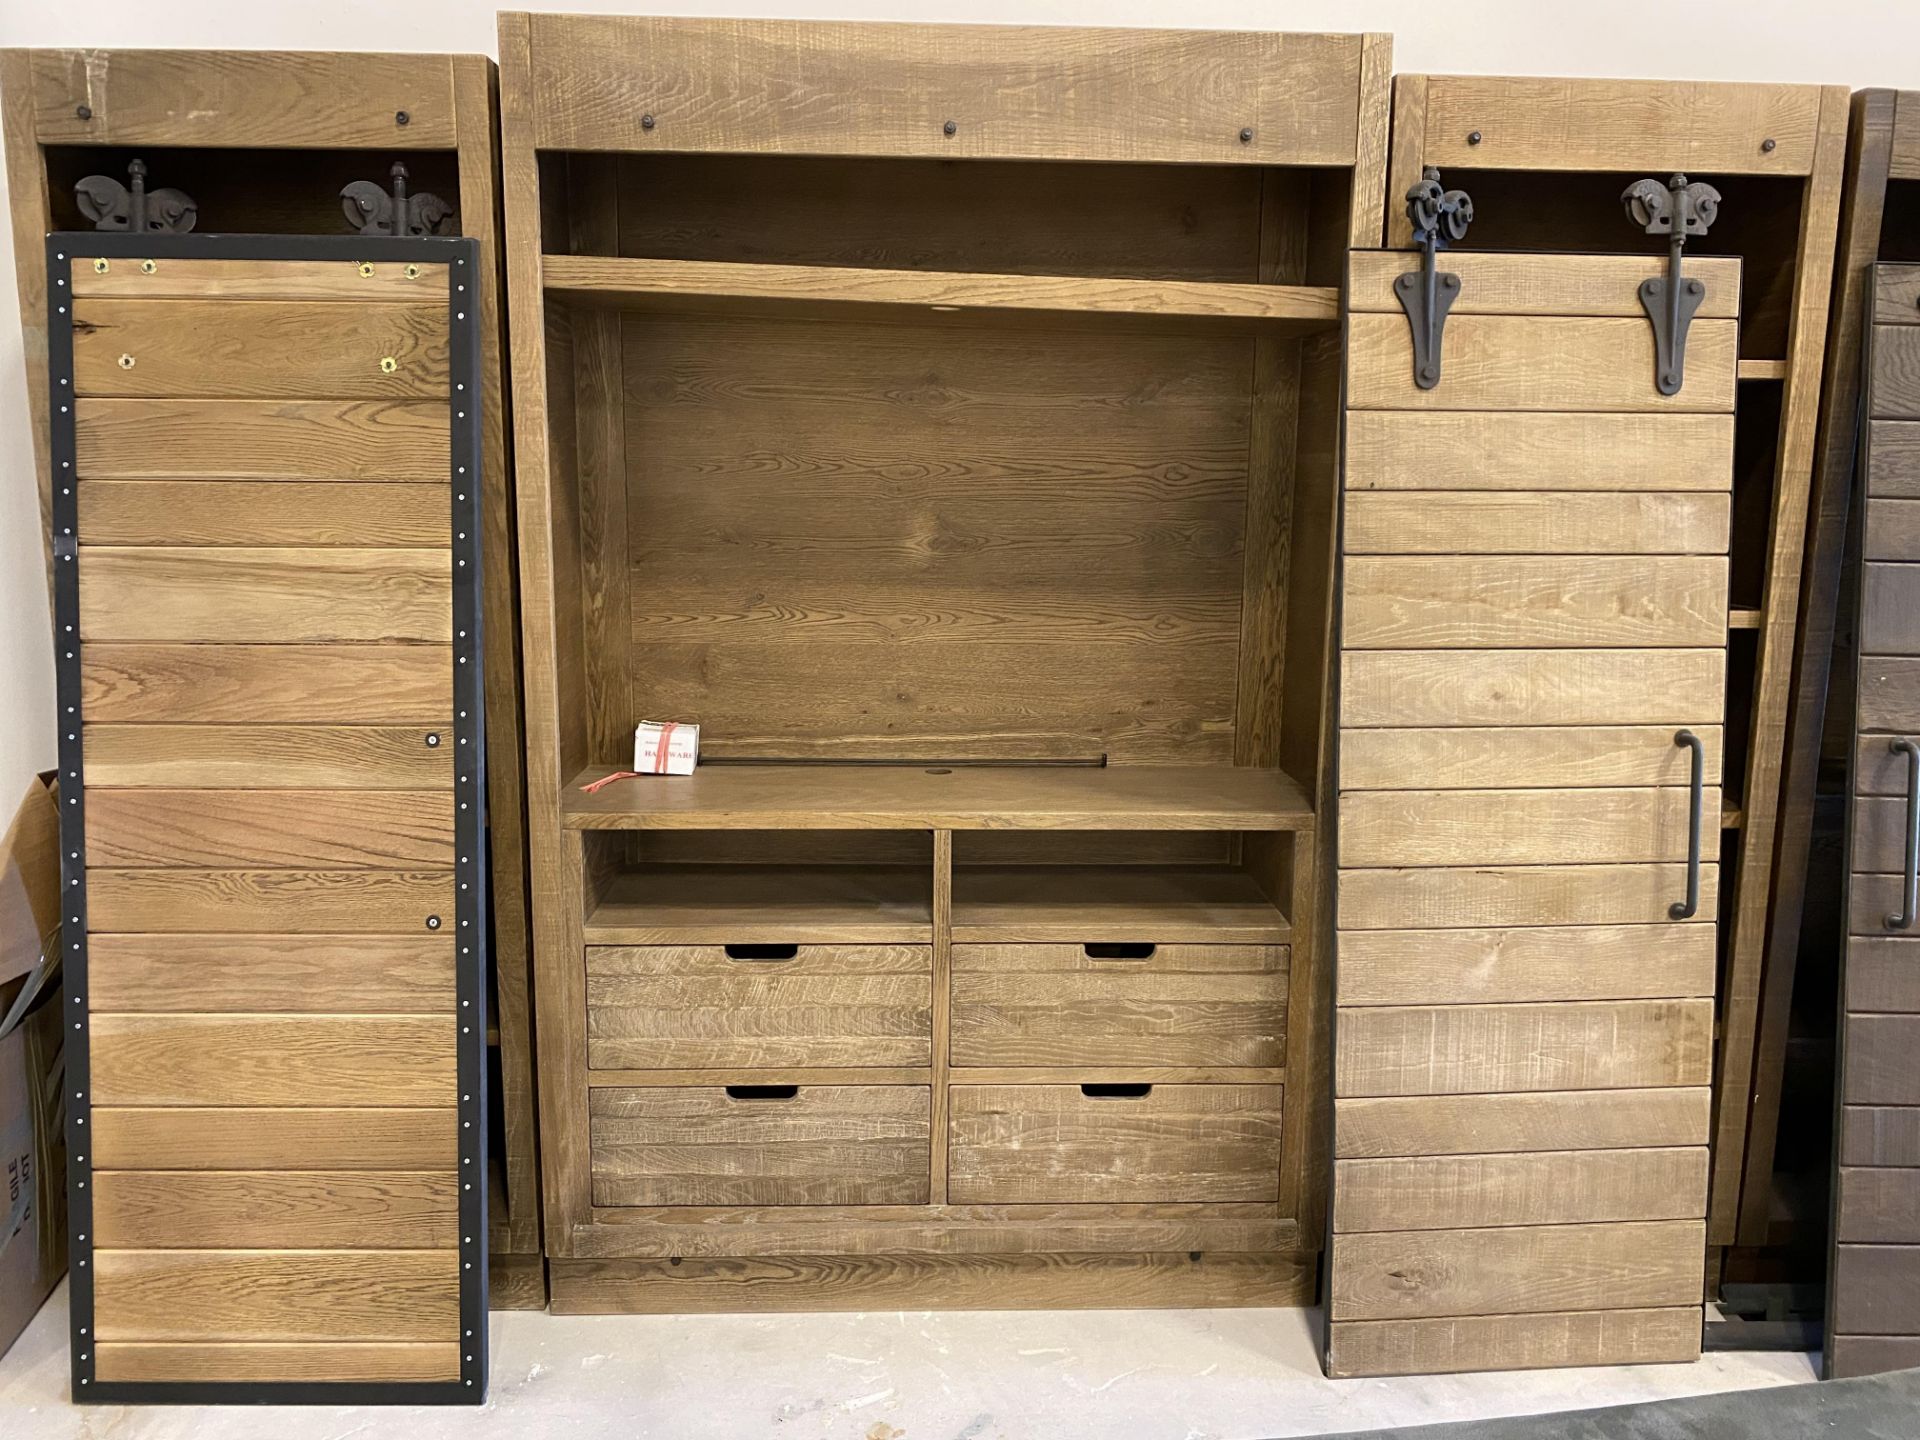 BEAUTIFUL LARGE ENTERTAINMENT UNIT $6000 VALUE WITH BARN STYLE DOORS